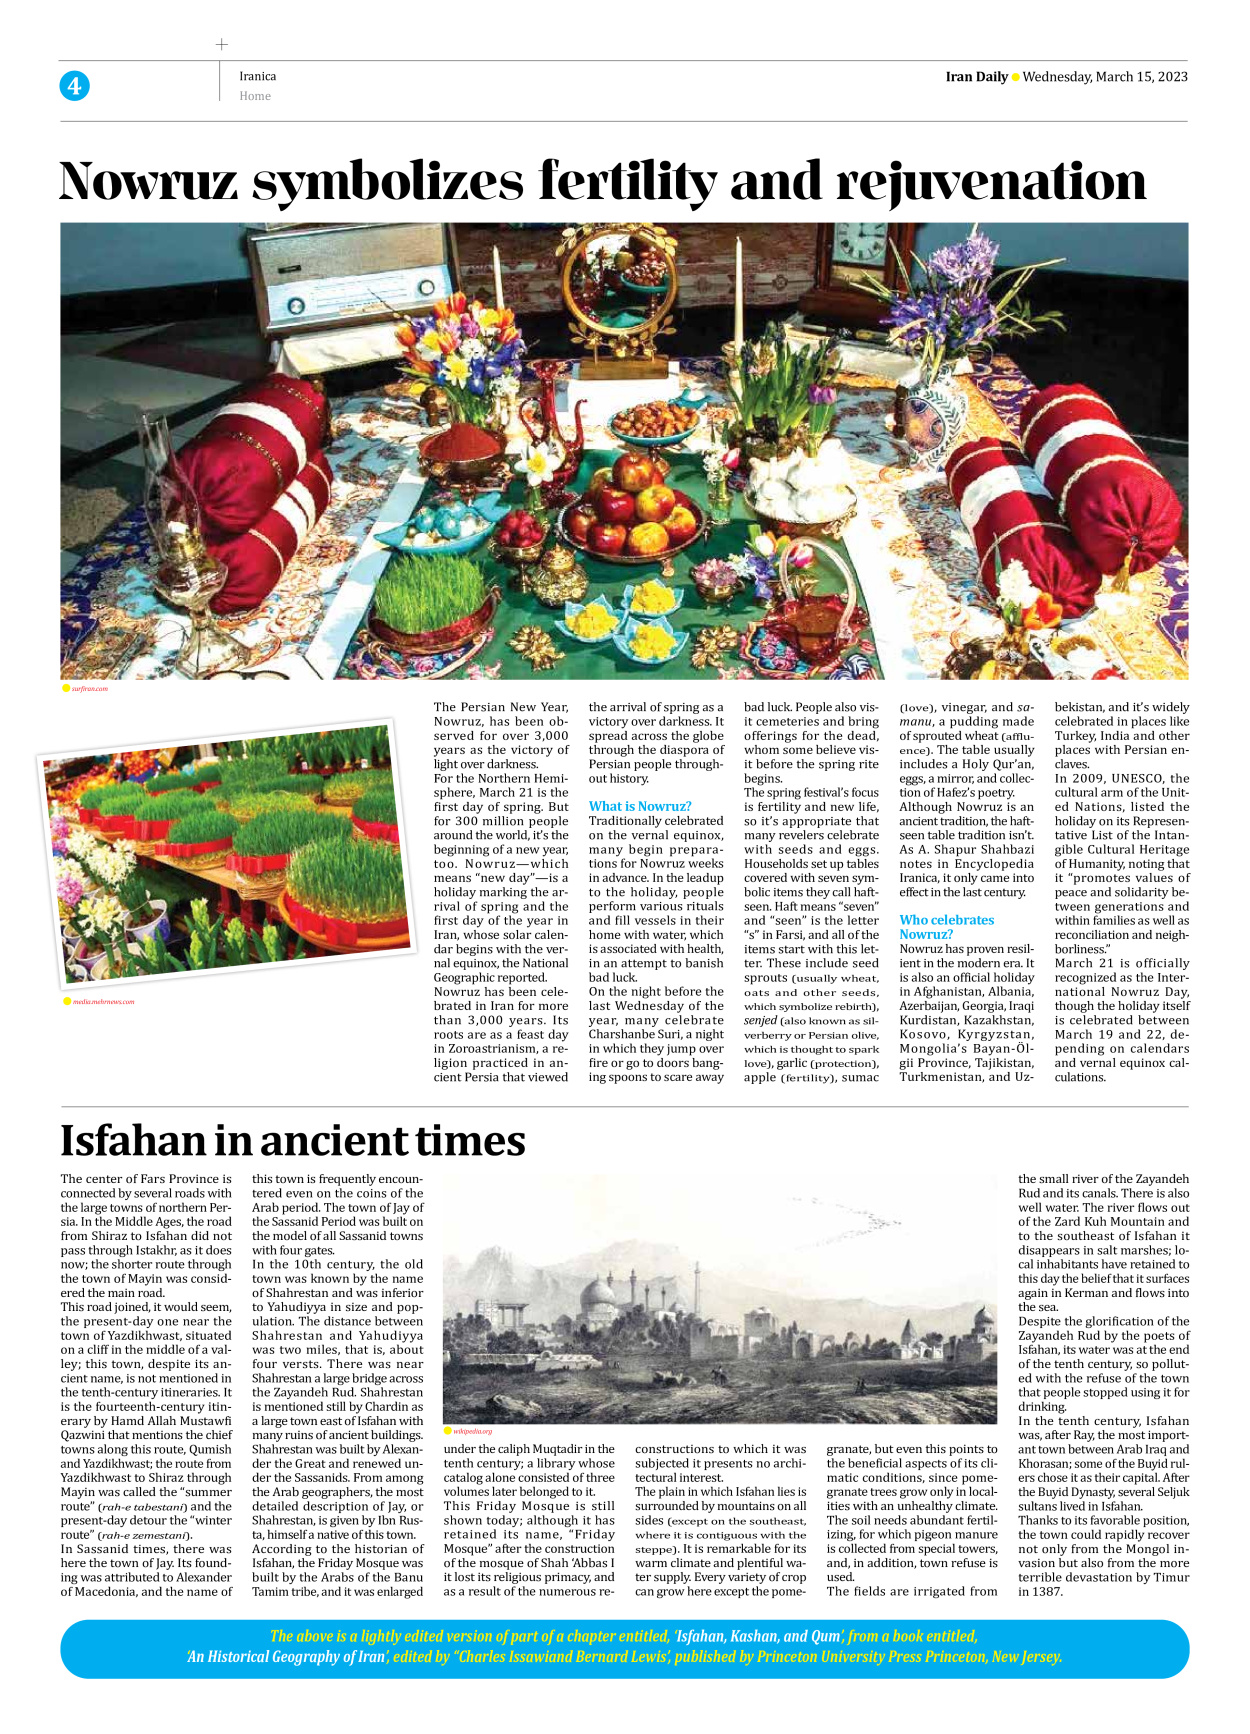 Iran Daily - Number Seven Thousand Two Hundred and Fifty Eight - 15 March 2023 - Page 4